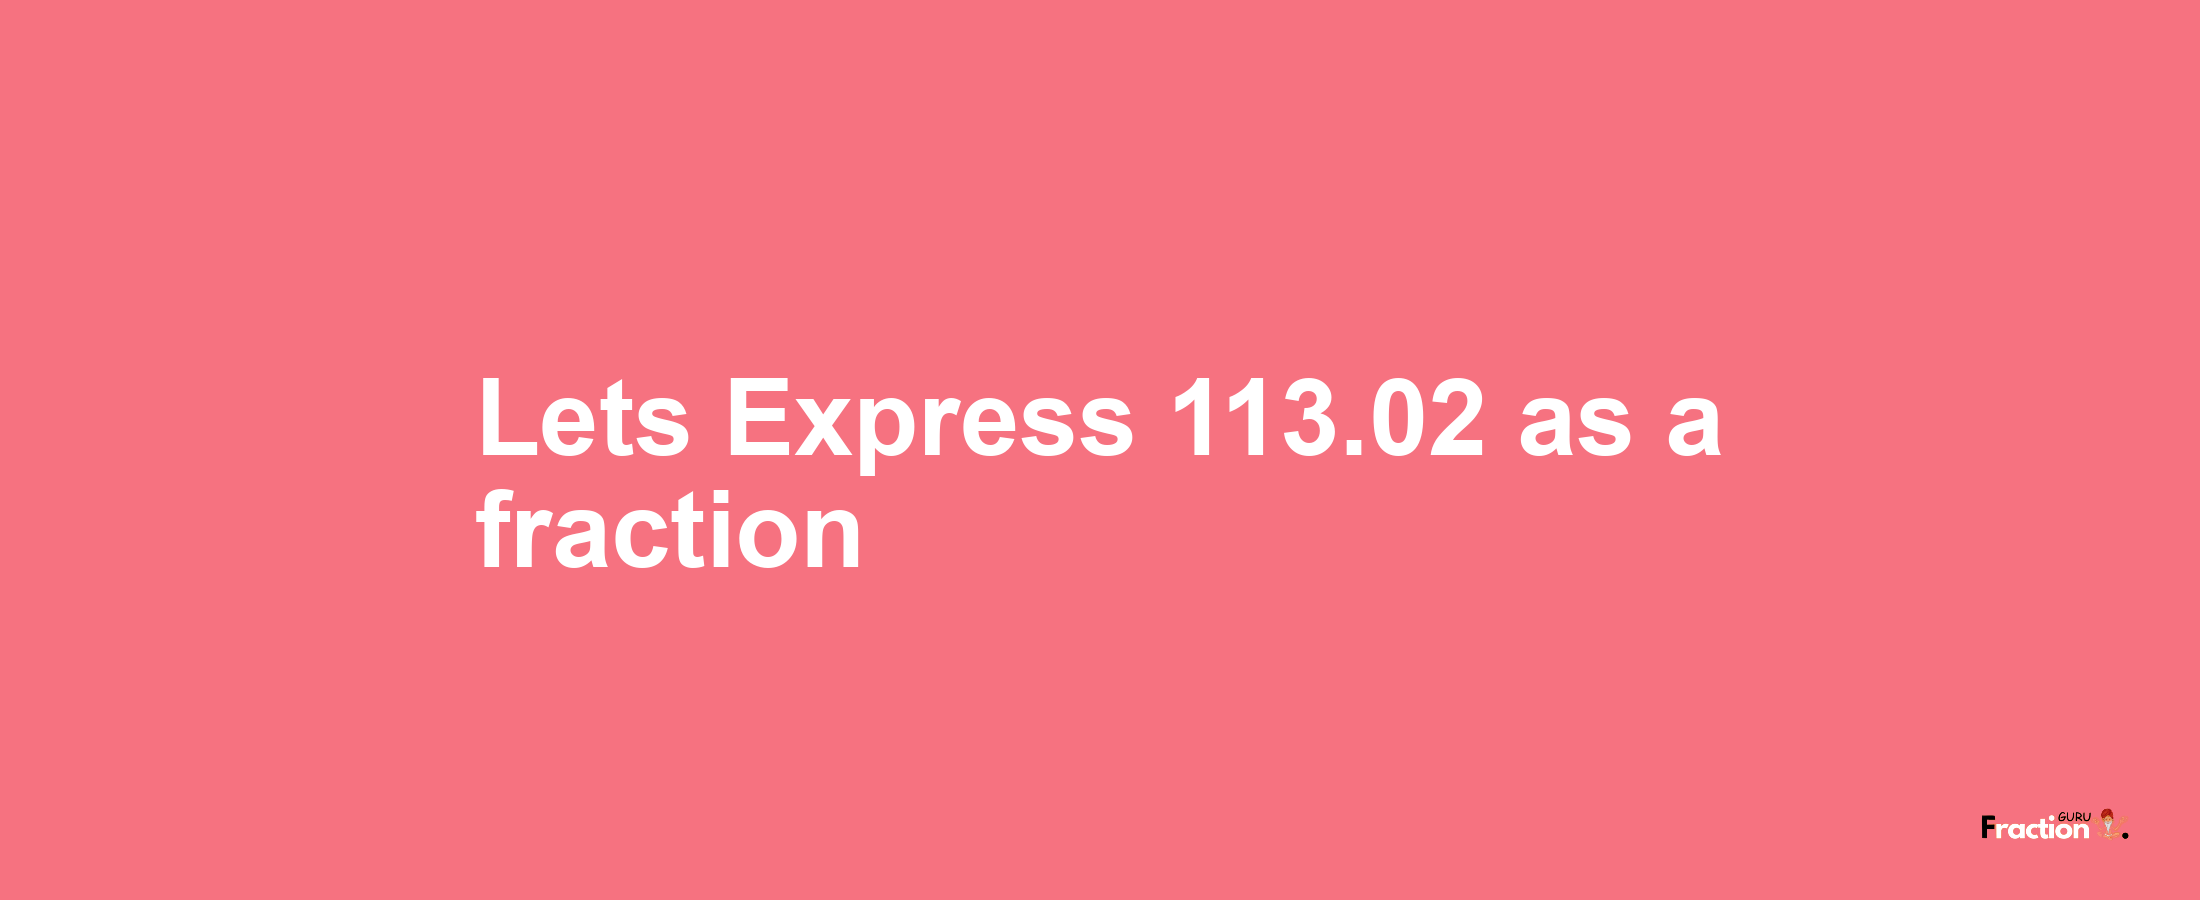 Lets Express 113.02 as afraction